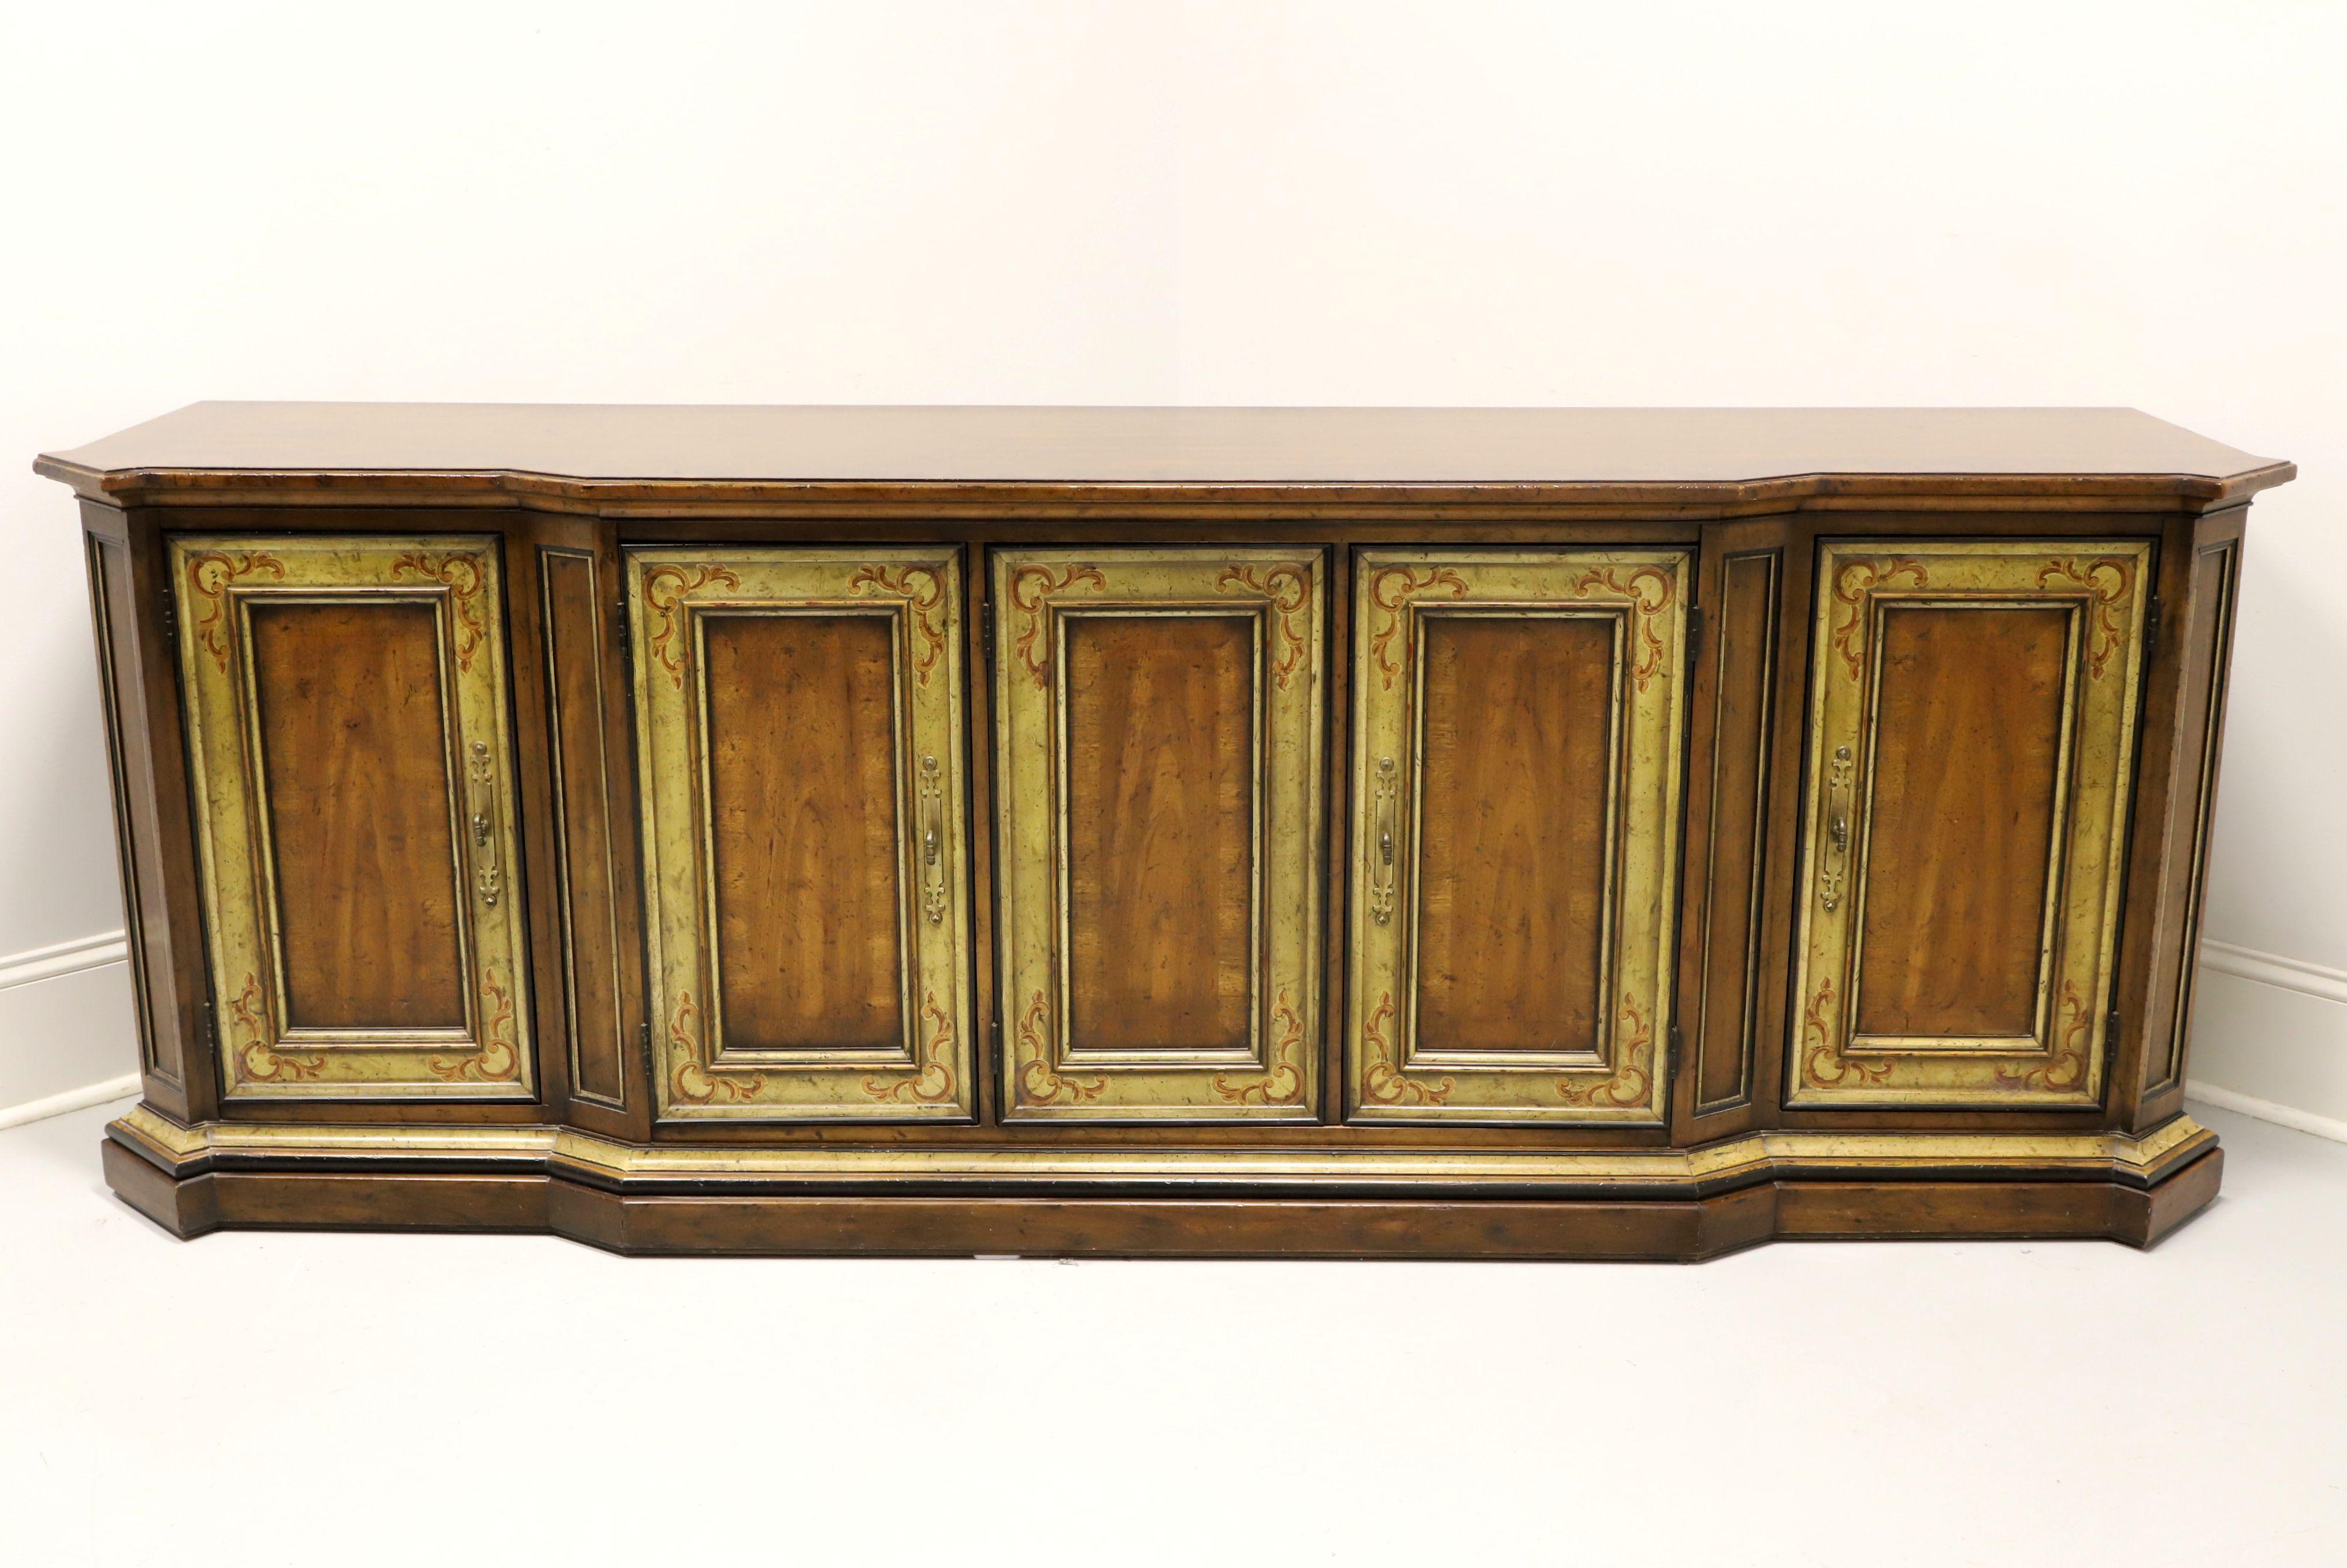 An oversized, French country style, credenza by Drexel Heritage, from their Sketchbook Collection. Mahogany with a distressed finish, banded distressed top, modified serpentine front, brass hardware, banded flame mahogany door fronts, painted